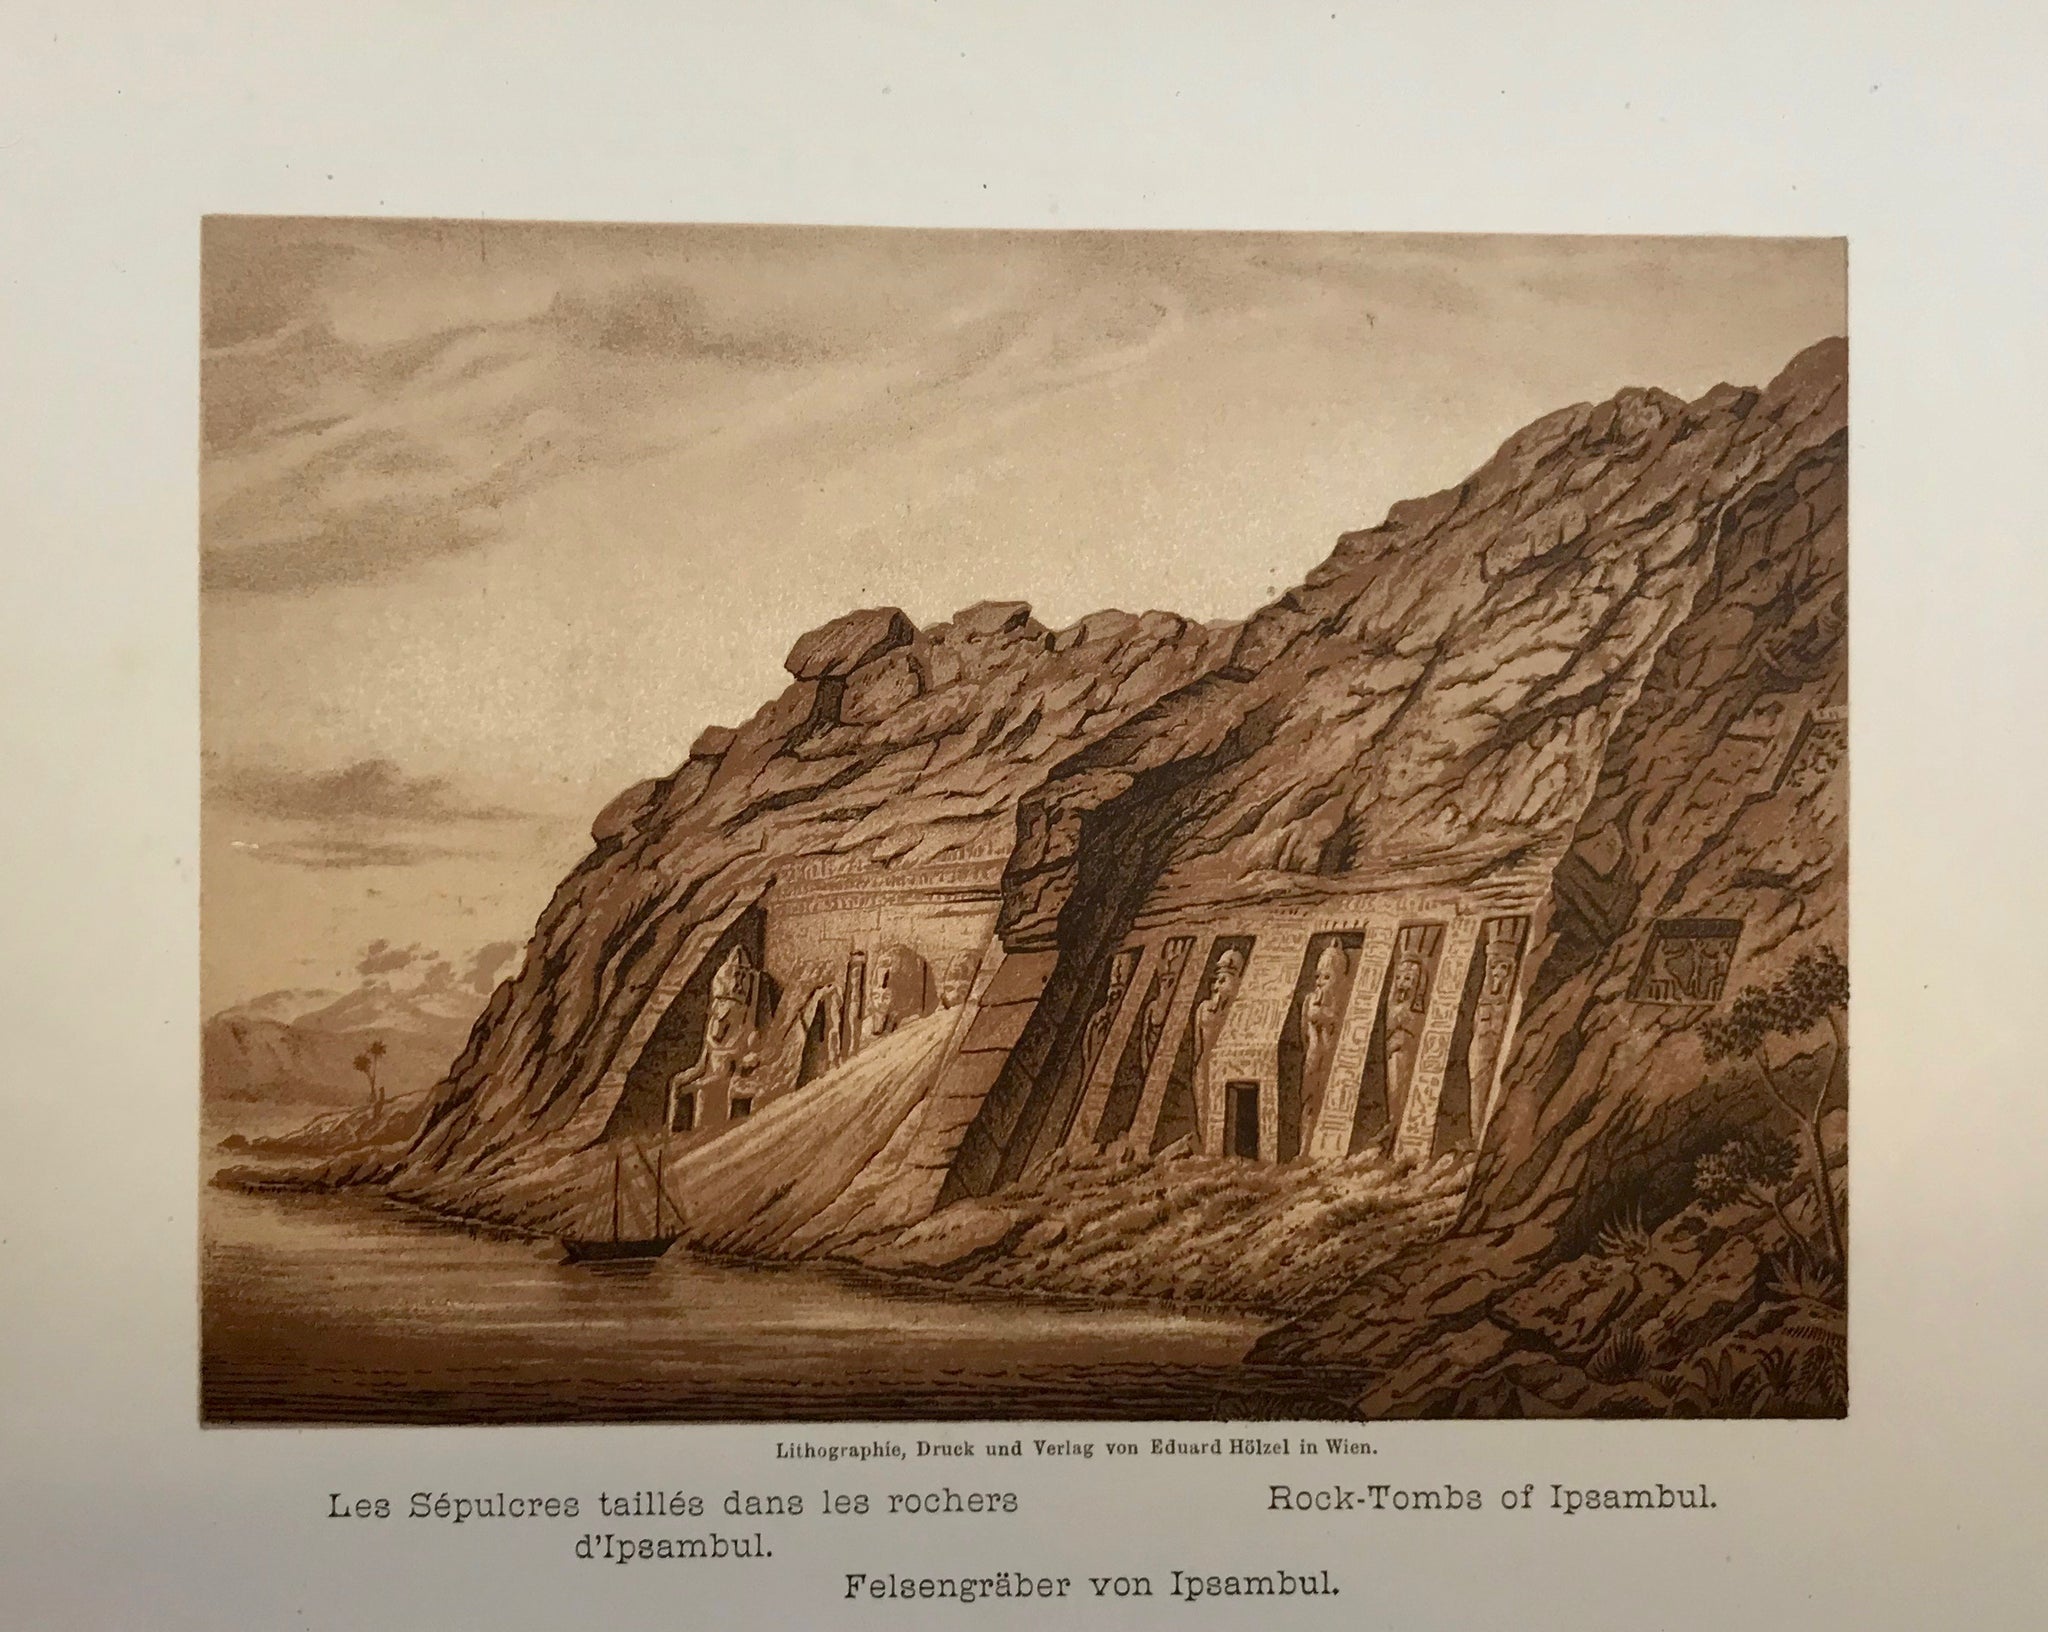 "Les Sepulcree tailles dans les rochers d' Ipsambul. Rock Tombs of Ipsambul"  Anonymous lithograph printed in a very pleasant sepia tone. Published 1889. Included is an extra page of text in German about the tombs of Ipsambul (Abu Simbel).